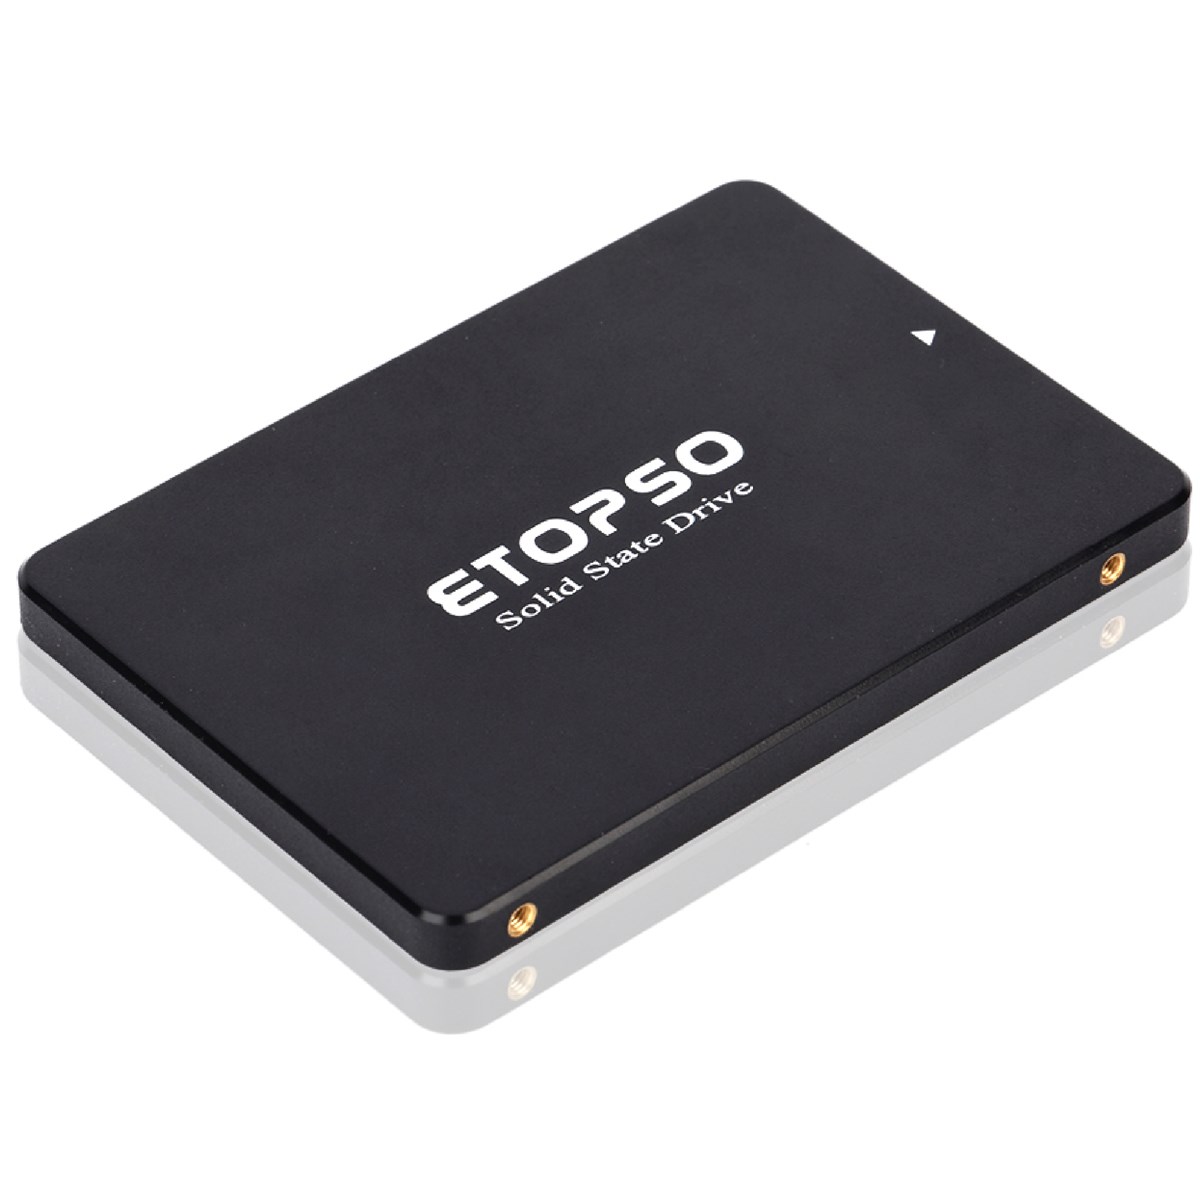 Etopso solid state drives 25 inch sata iii factory wholesale best price hard disk 120gb128gb240gb256gb480gb512gb